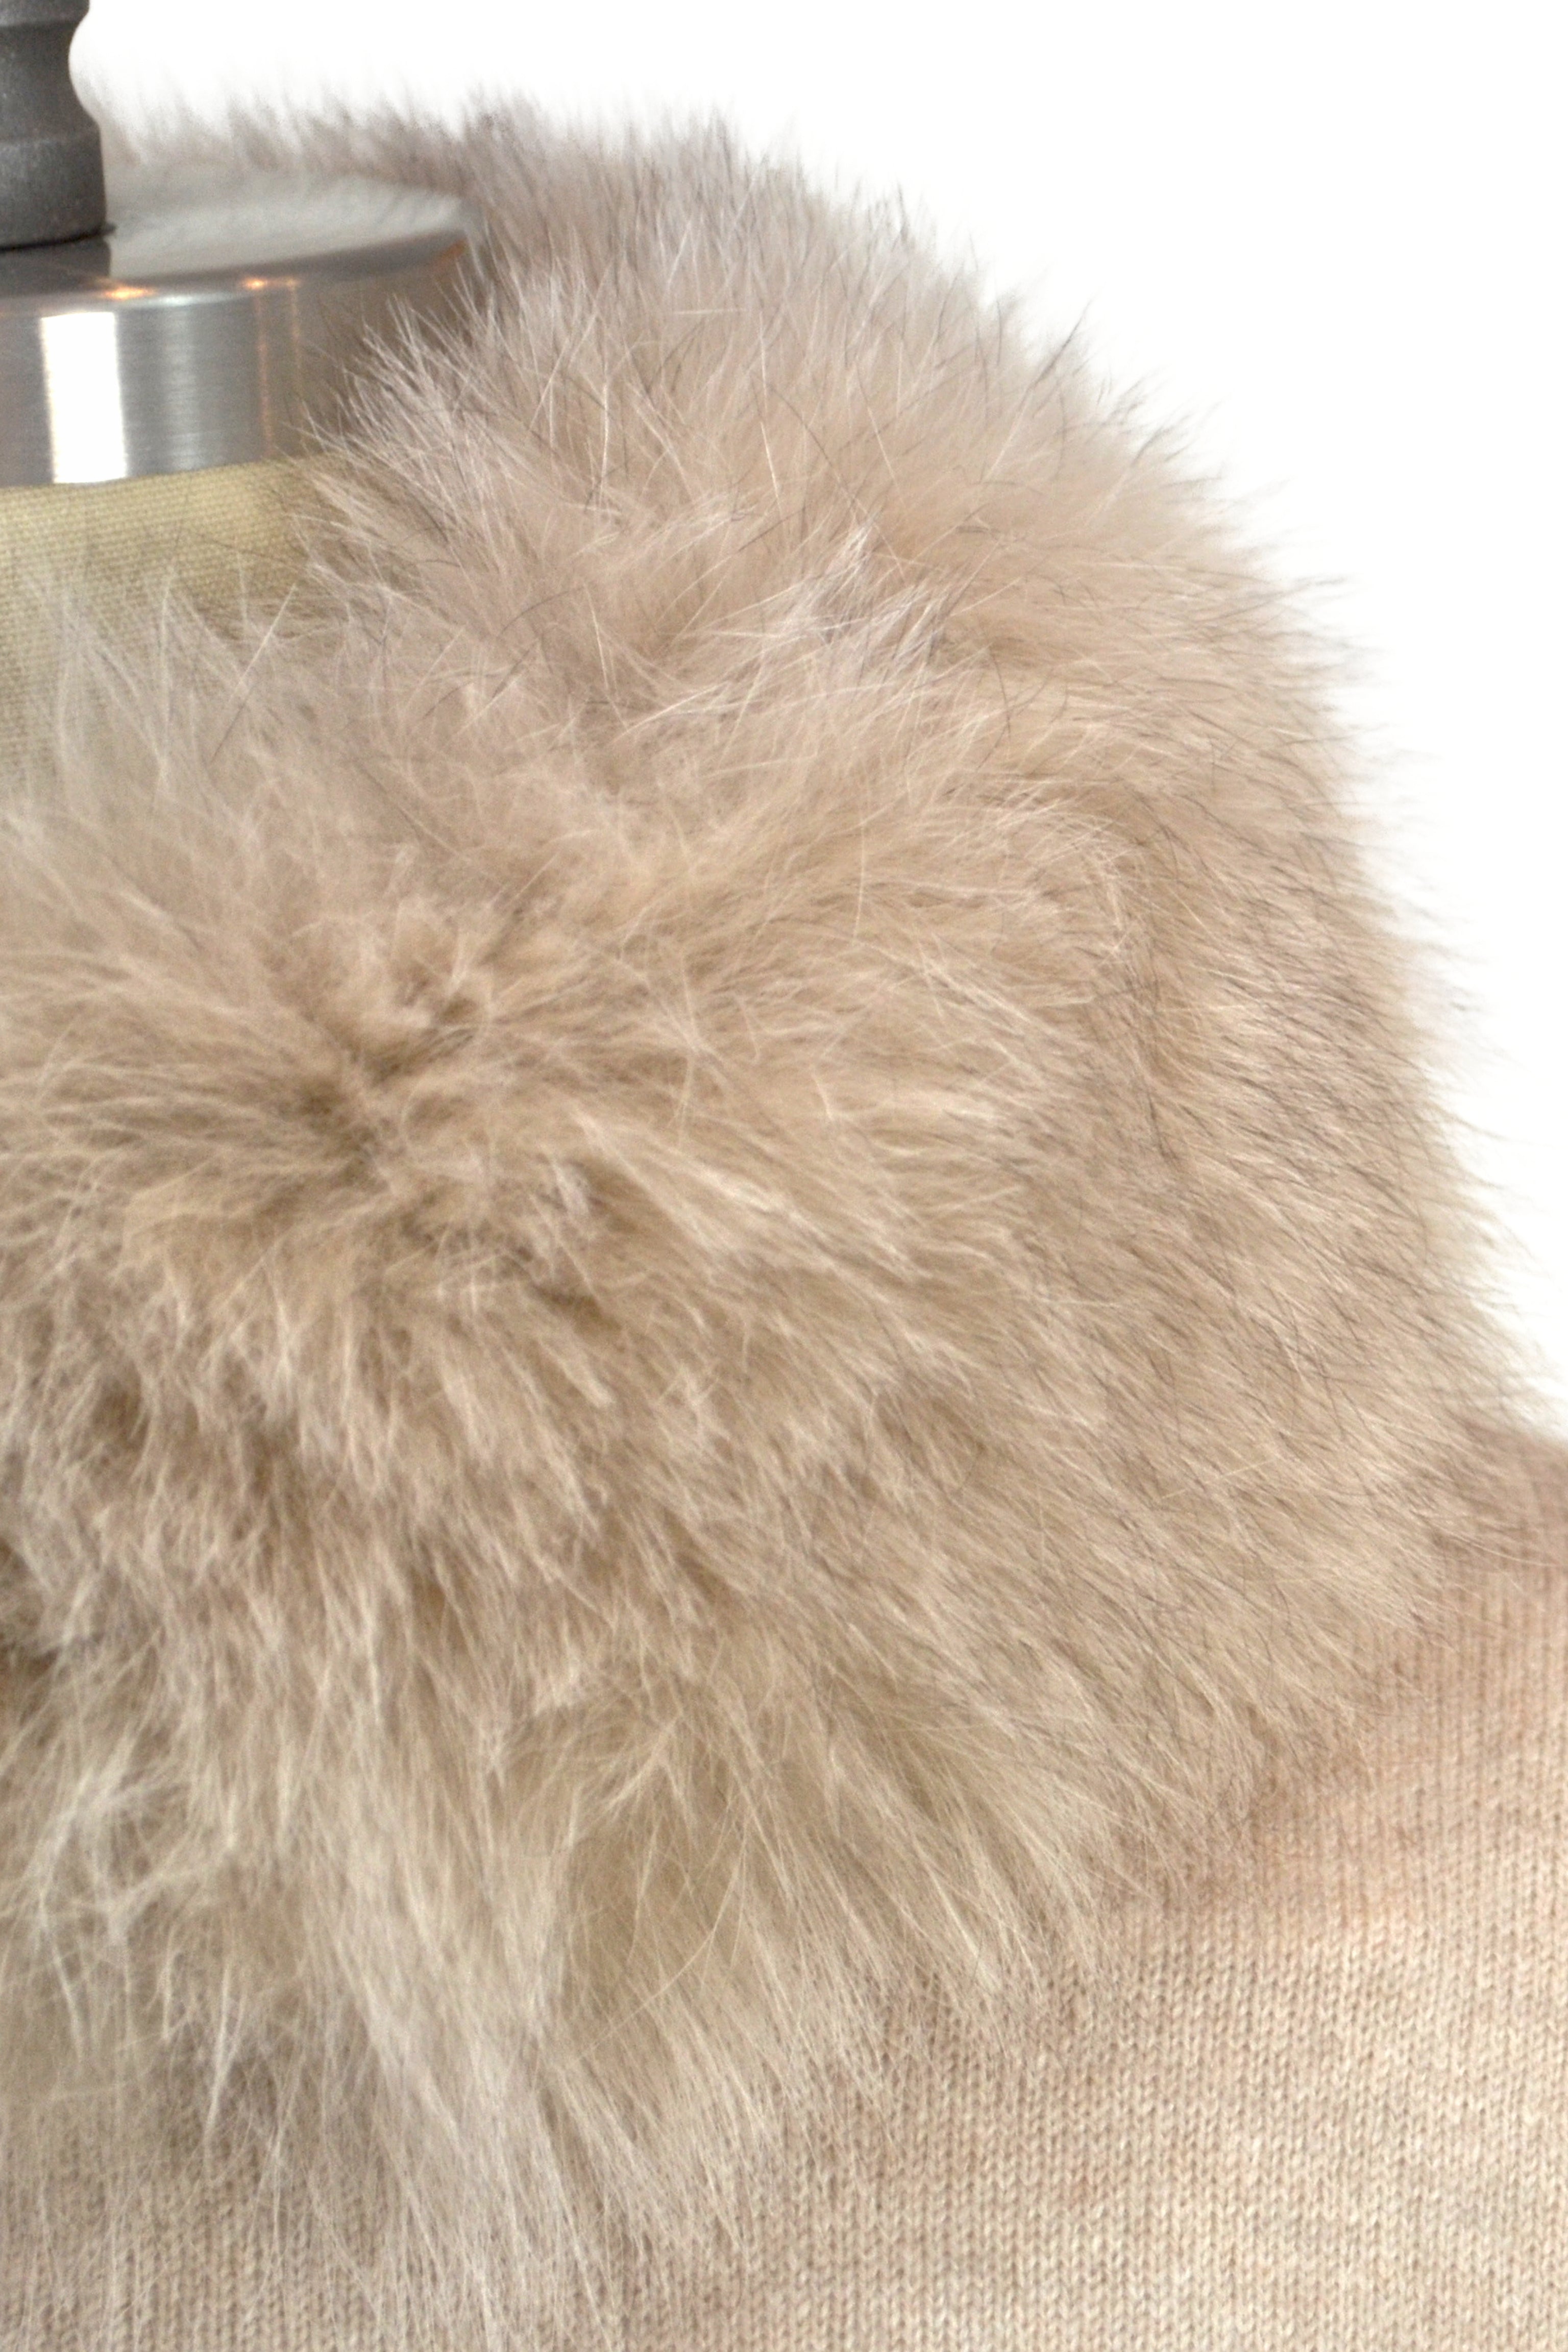 Cashmere Vest with Fox Fur Collar in Oatmeal